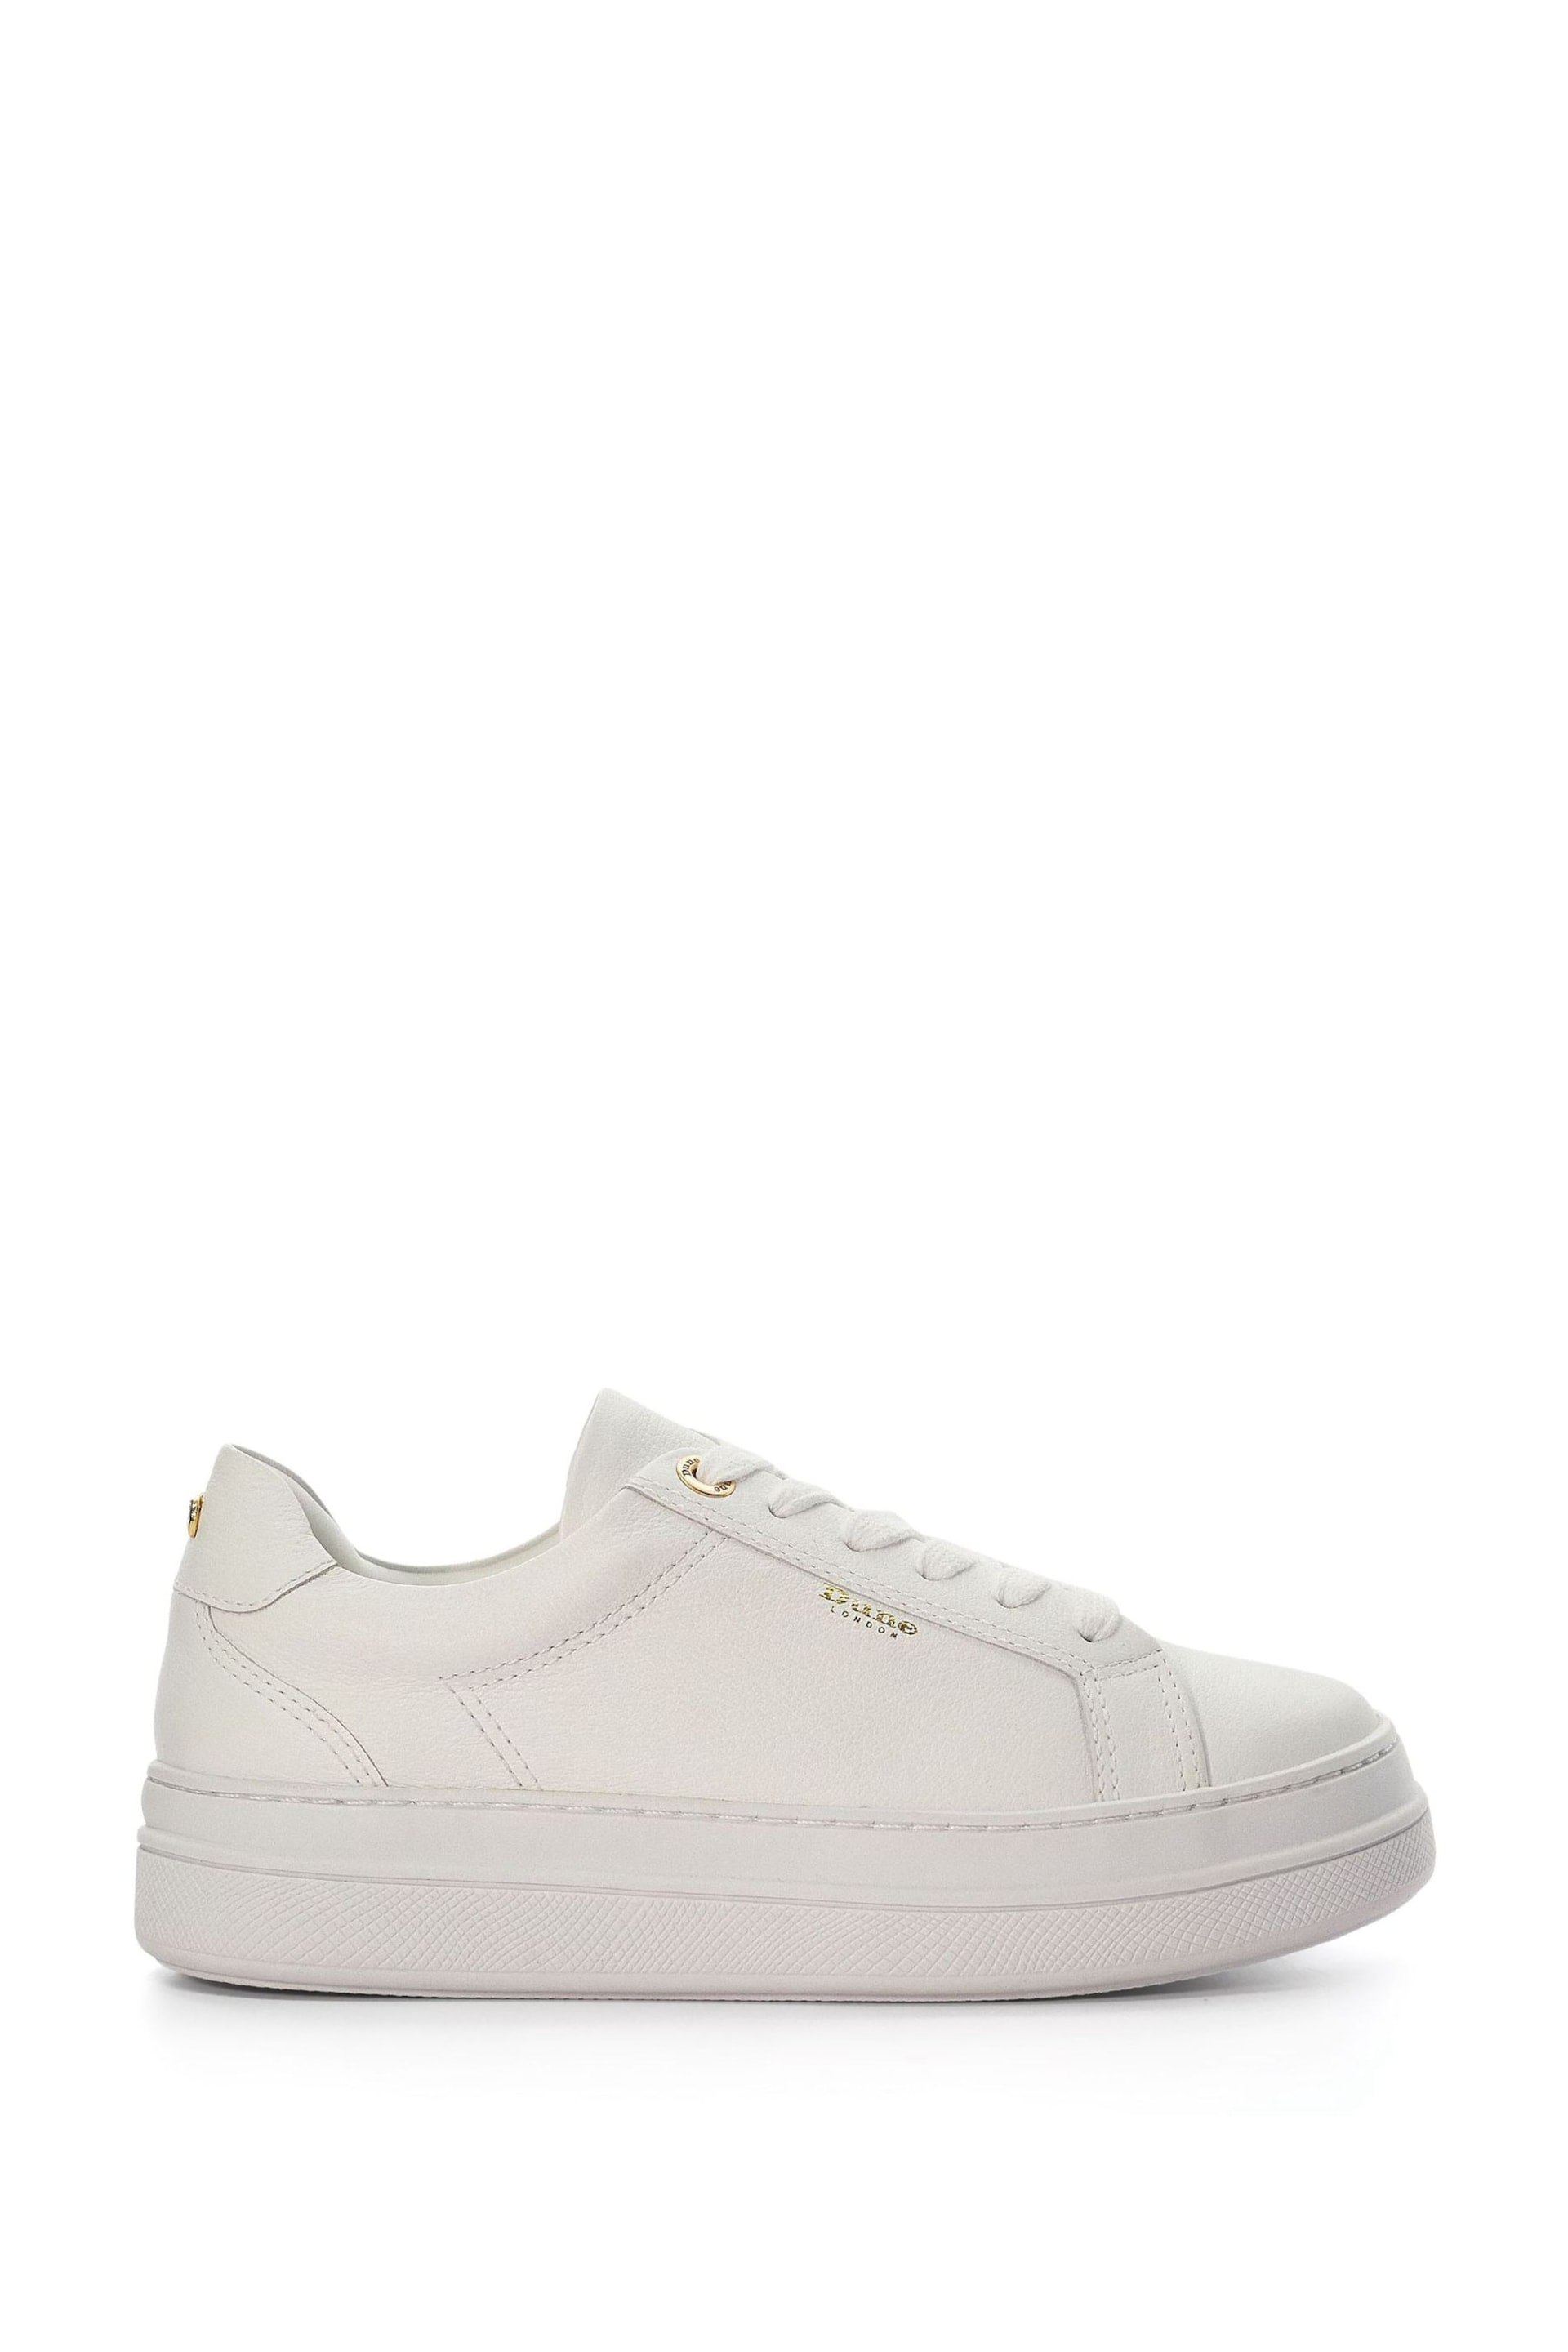 Dune London White Eastern Branded Chunky Cup Sole Trainers - Image 4 of 6